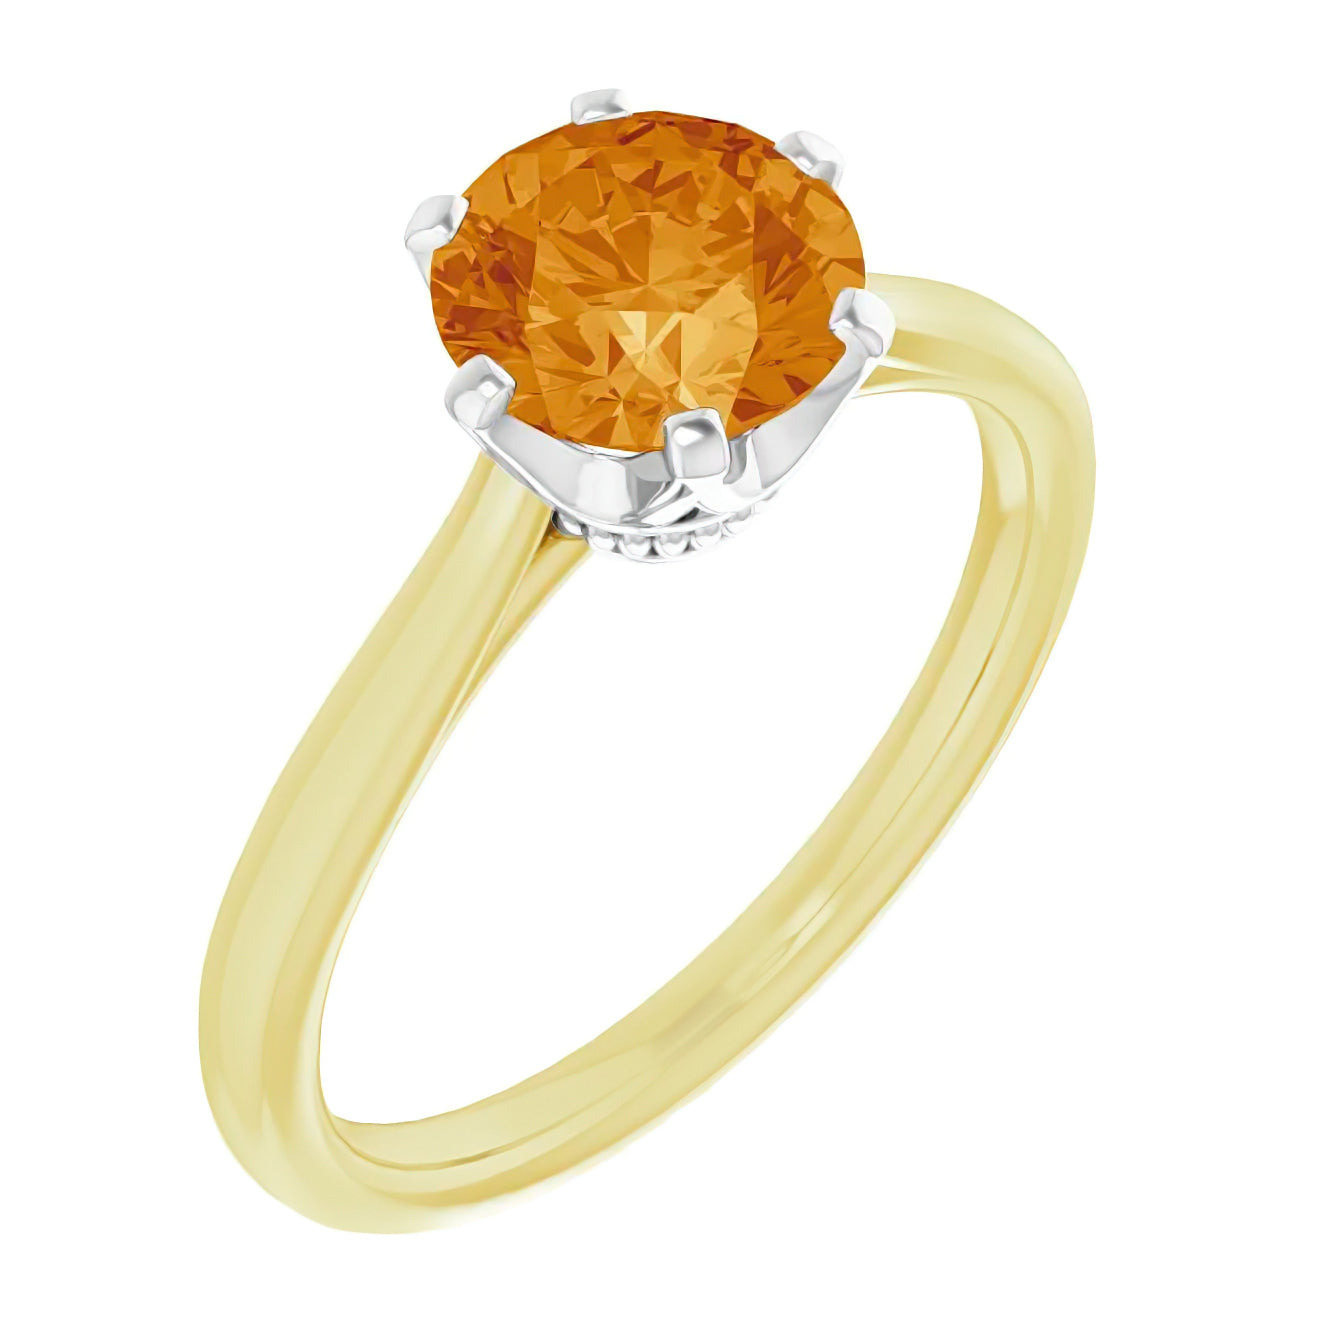 Crown Mounting 6 Prong Solitaire 1950s Vintage Citrine Solitaire Engagement Ring ​Yellow & White Gold​ ​Two Tone - 7mm Round Citrine ​- ​R102